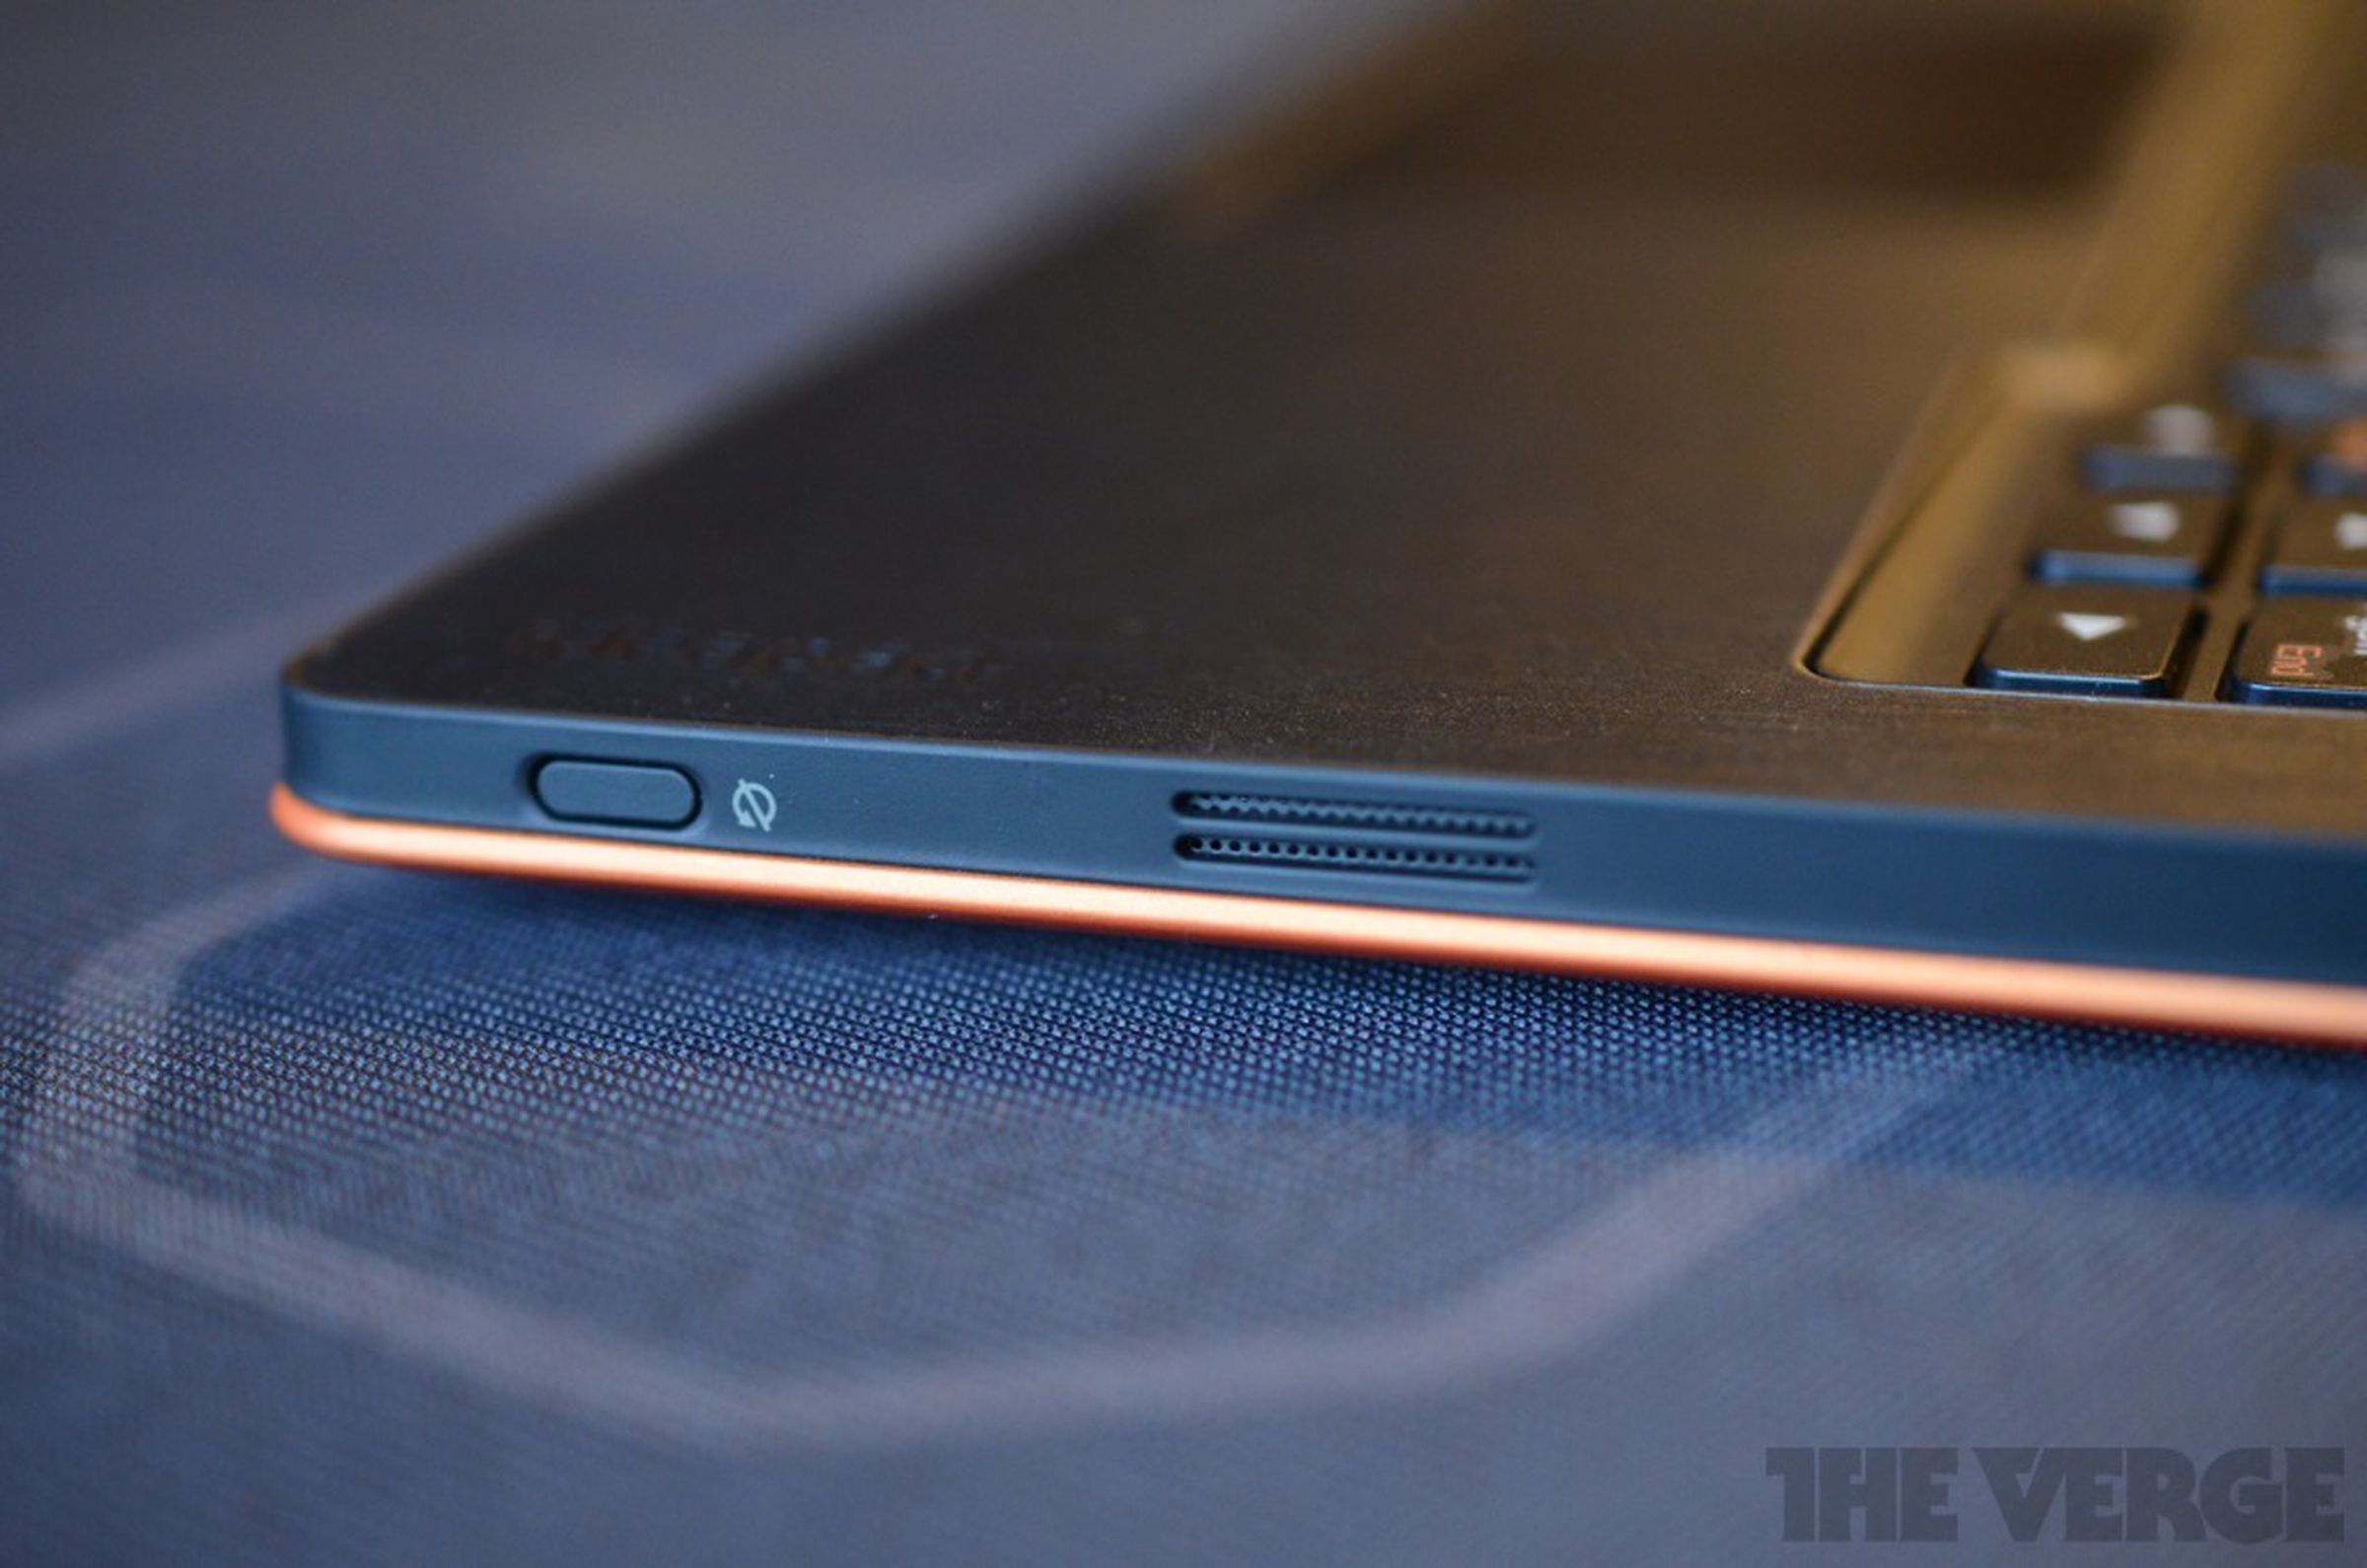 Lenovo IdeaPad Yoga 11S hands-on pictures